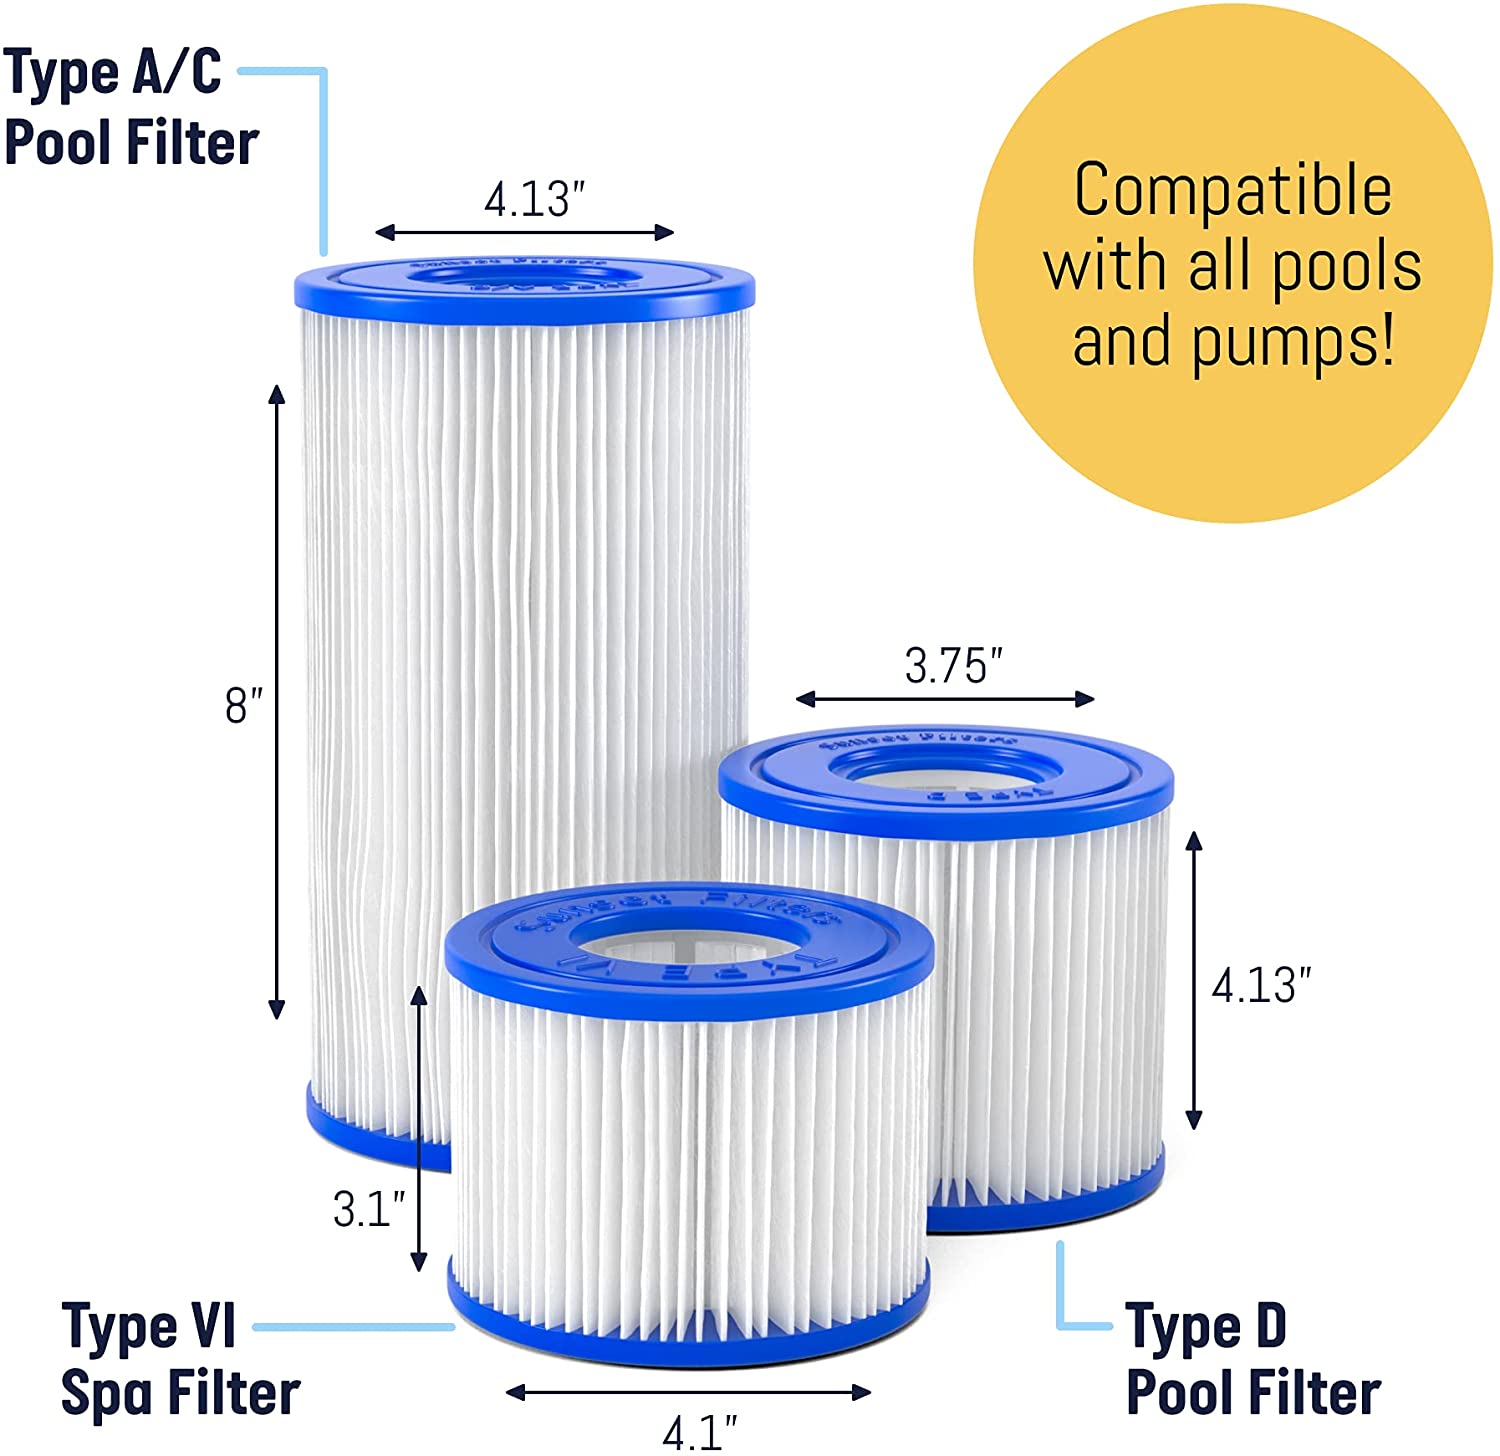 SUNSET VI Hot Tub Filters (4 Pack)